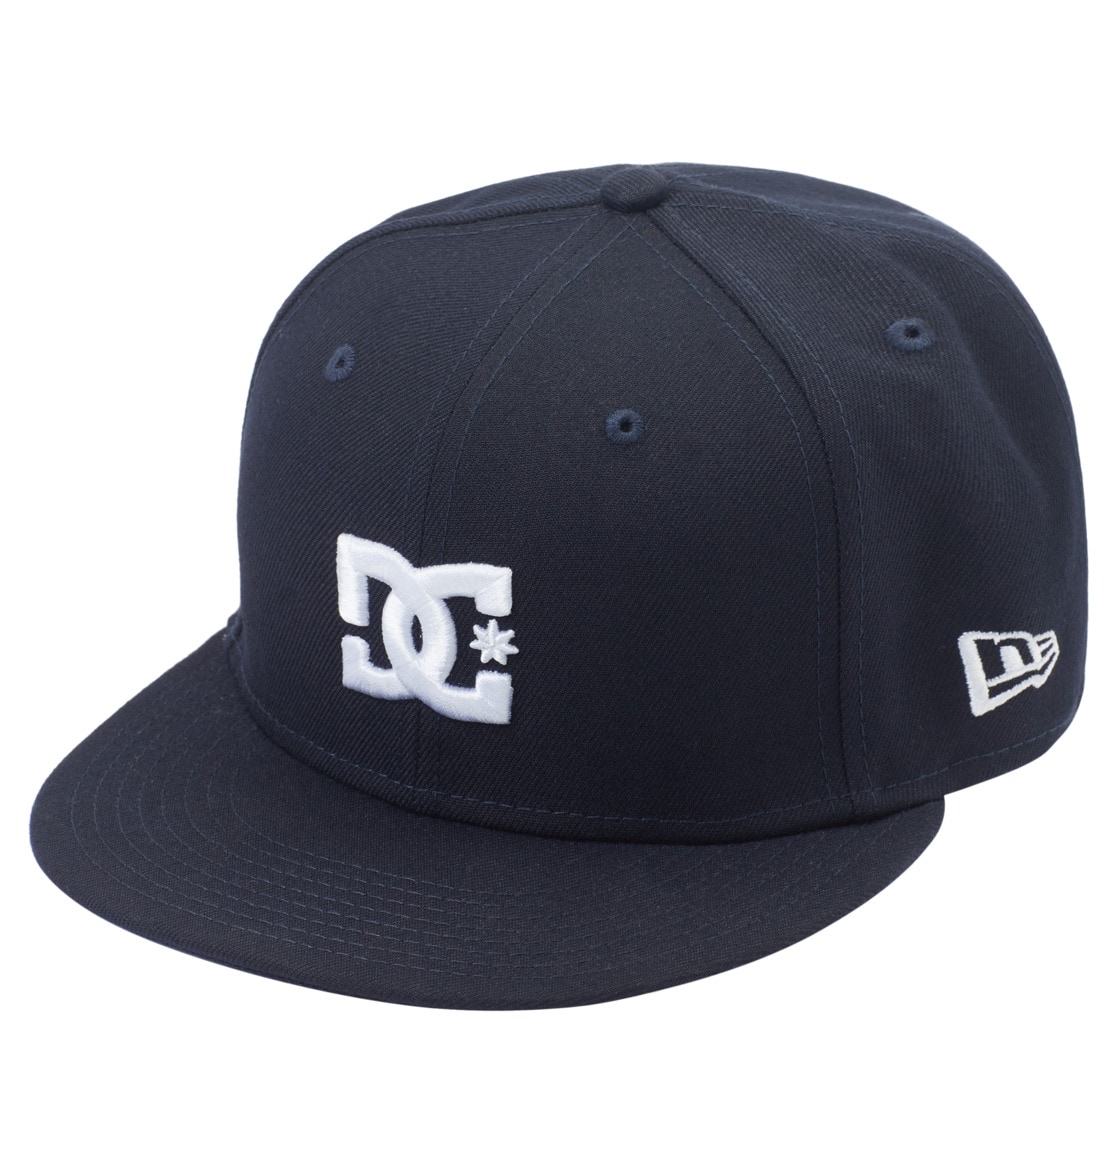 Shoes Cap Online OTTO im DC »Championship« Shop Fitted